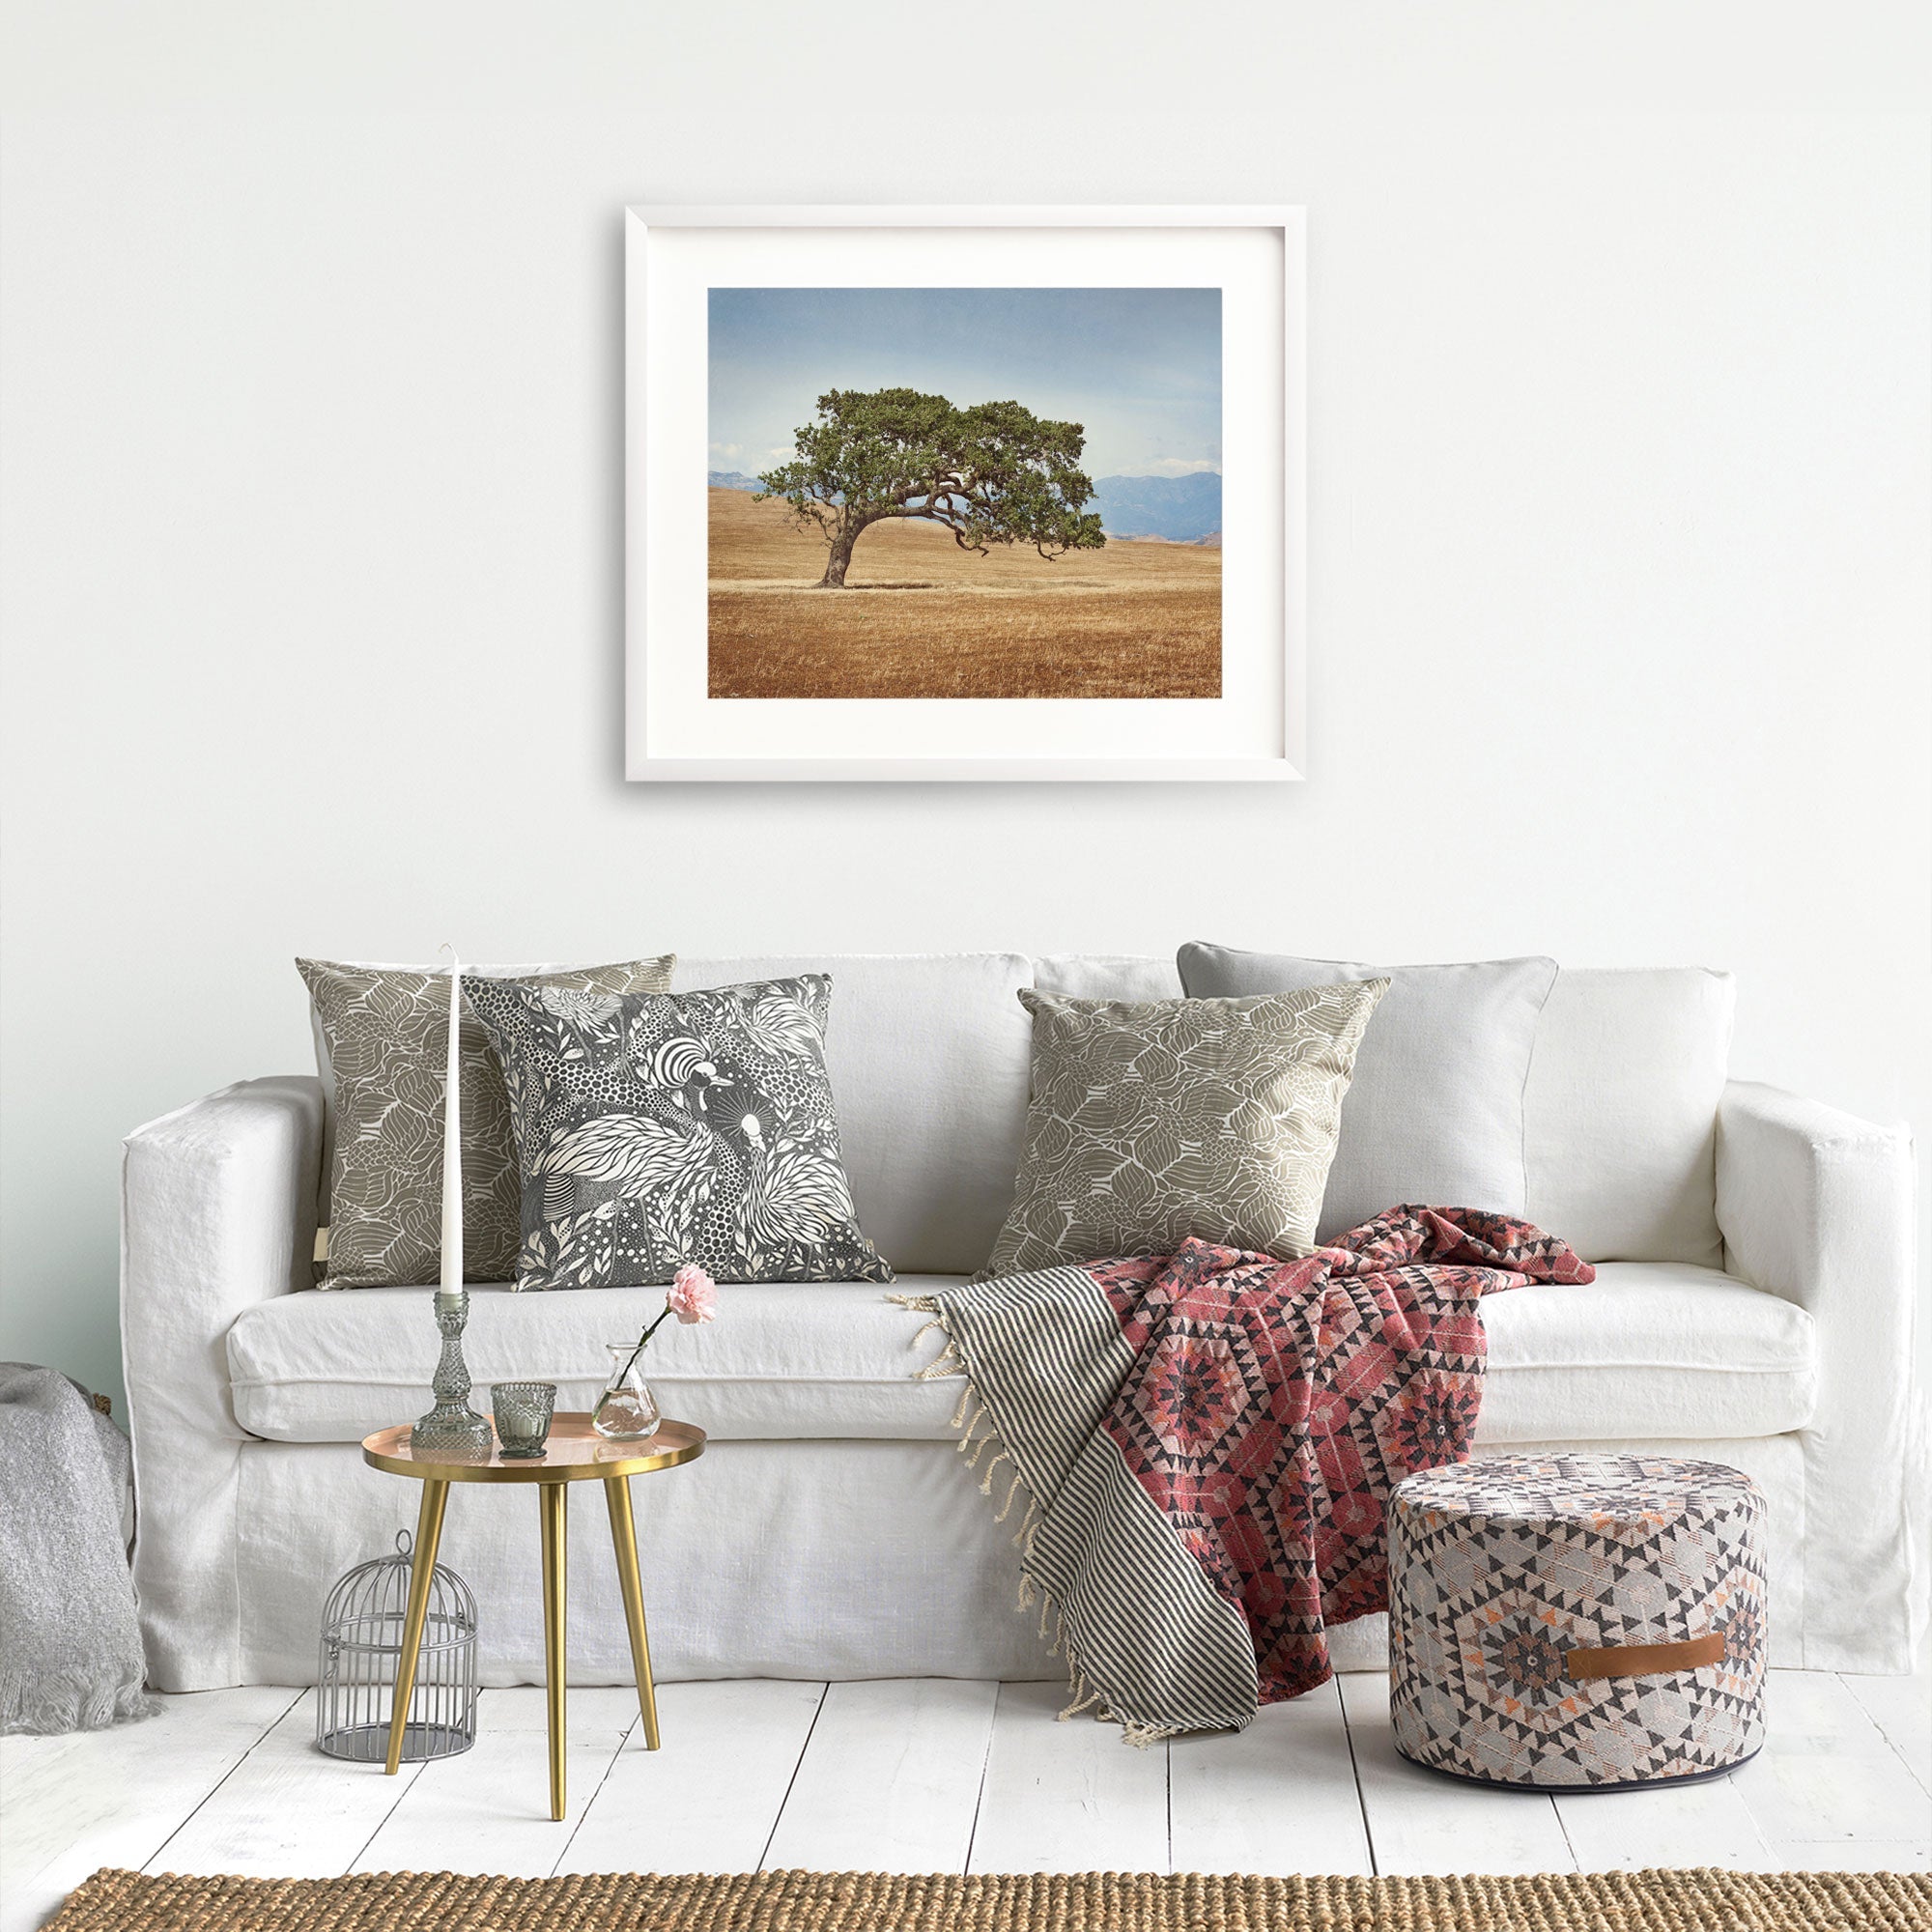 A cozy living room featuring a white sofa adorned with patterned cushions, a red throw blanket, a small round gold table with decorative items, and a framed California Oak Tree Print, &#39;Windswept&#39; from Offley Green on the wall above.